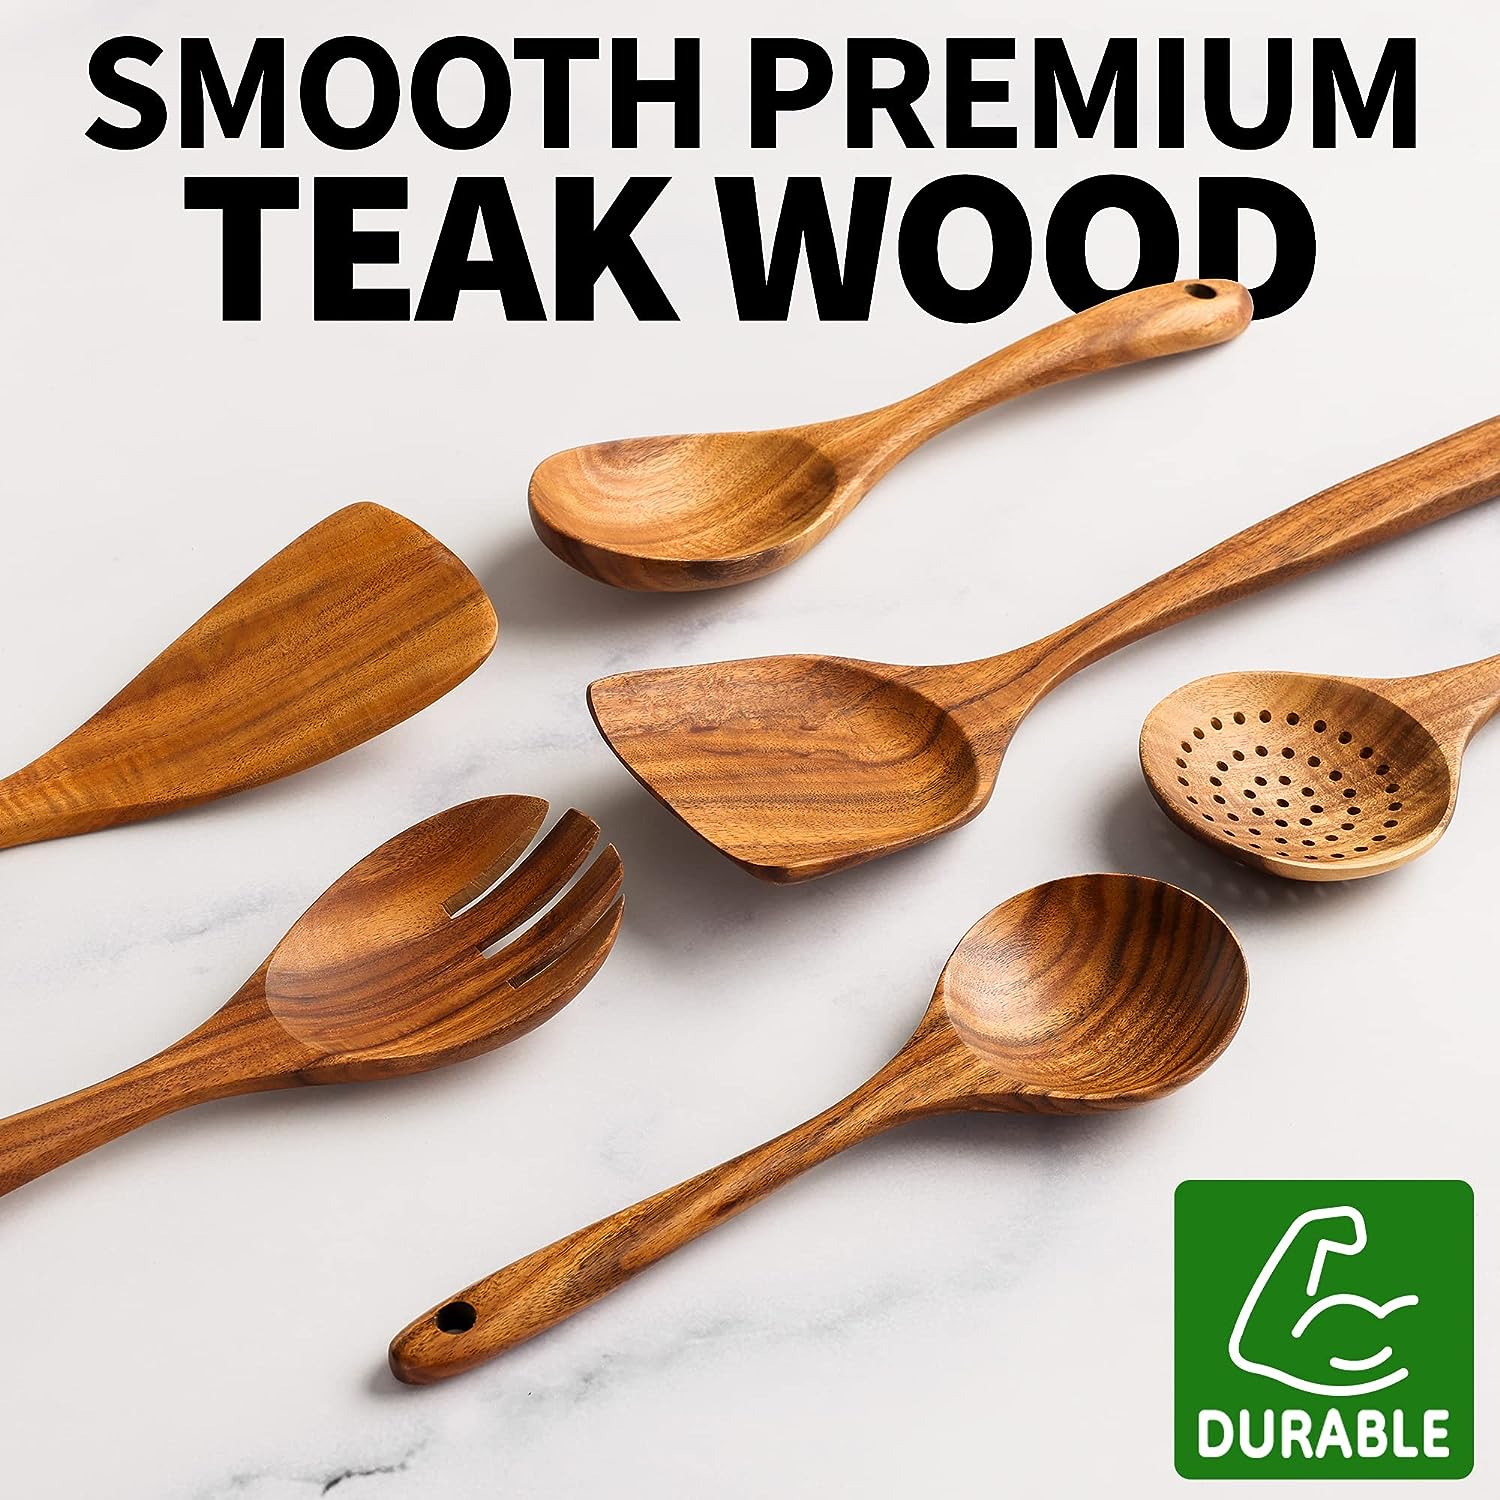 Wooden Spoons for Cooking,Wooden Utensils for Cooking Teak Wooden Kitchen  Utensil Set - Wooden Cooking Utensils Wooden Spatula 